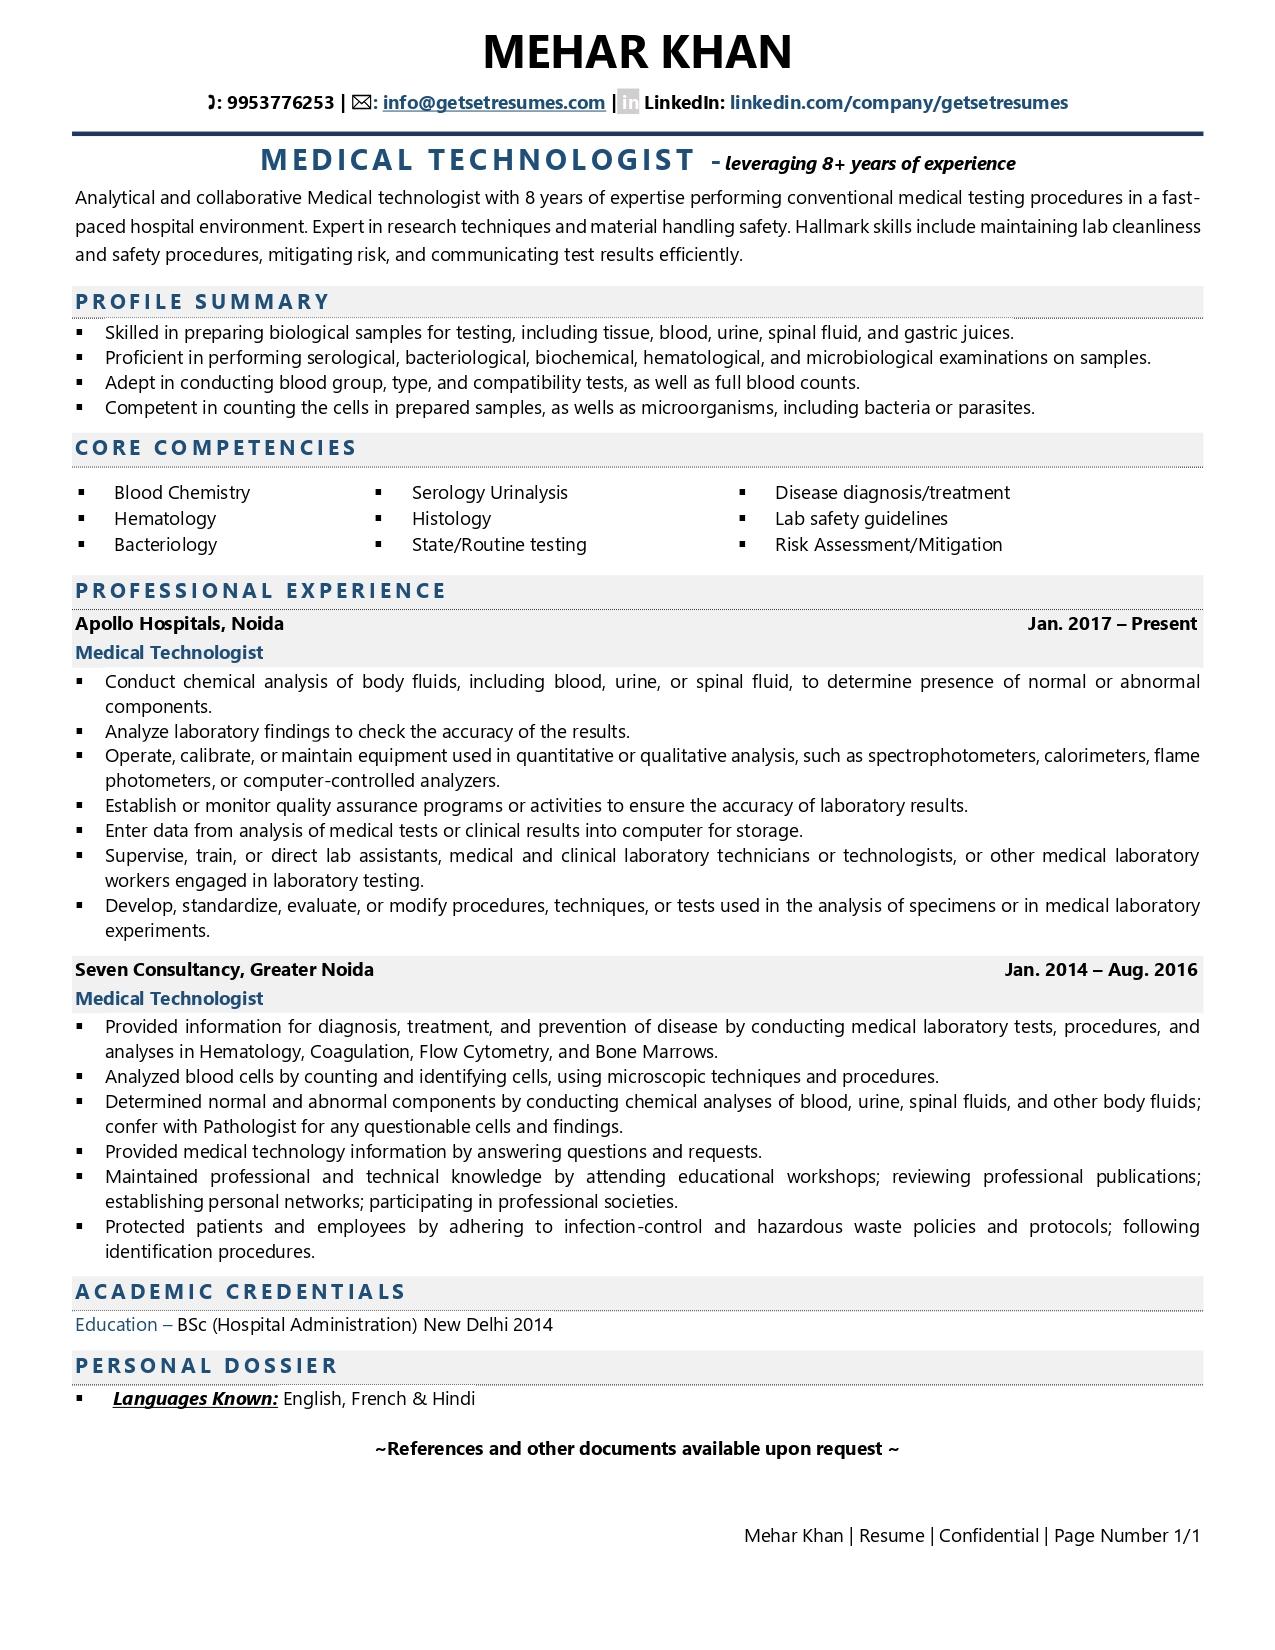 Medical Technologist - Resume Example & Template